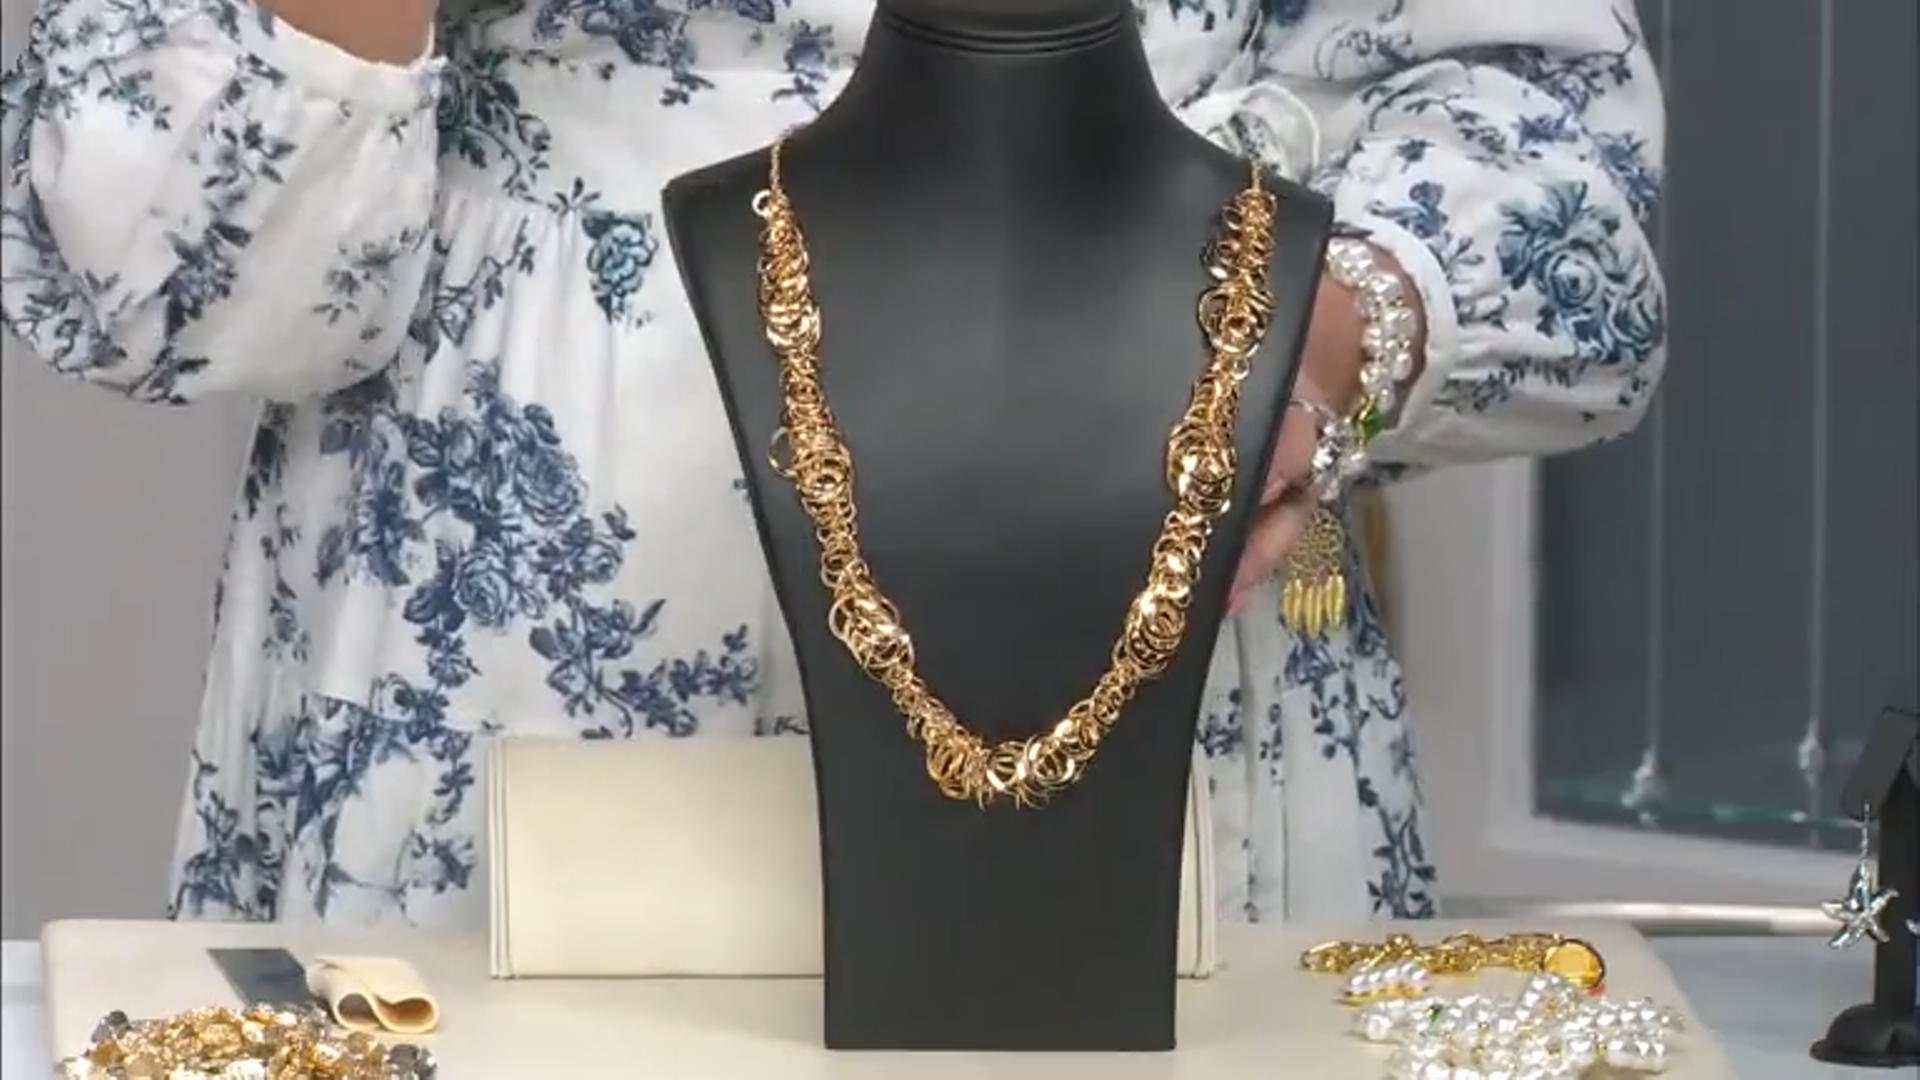 Gold Tone Link Necklace Video Thumbnail